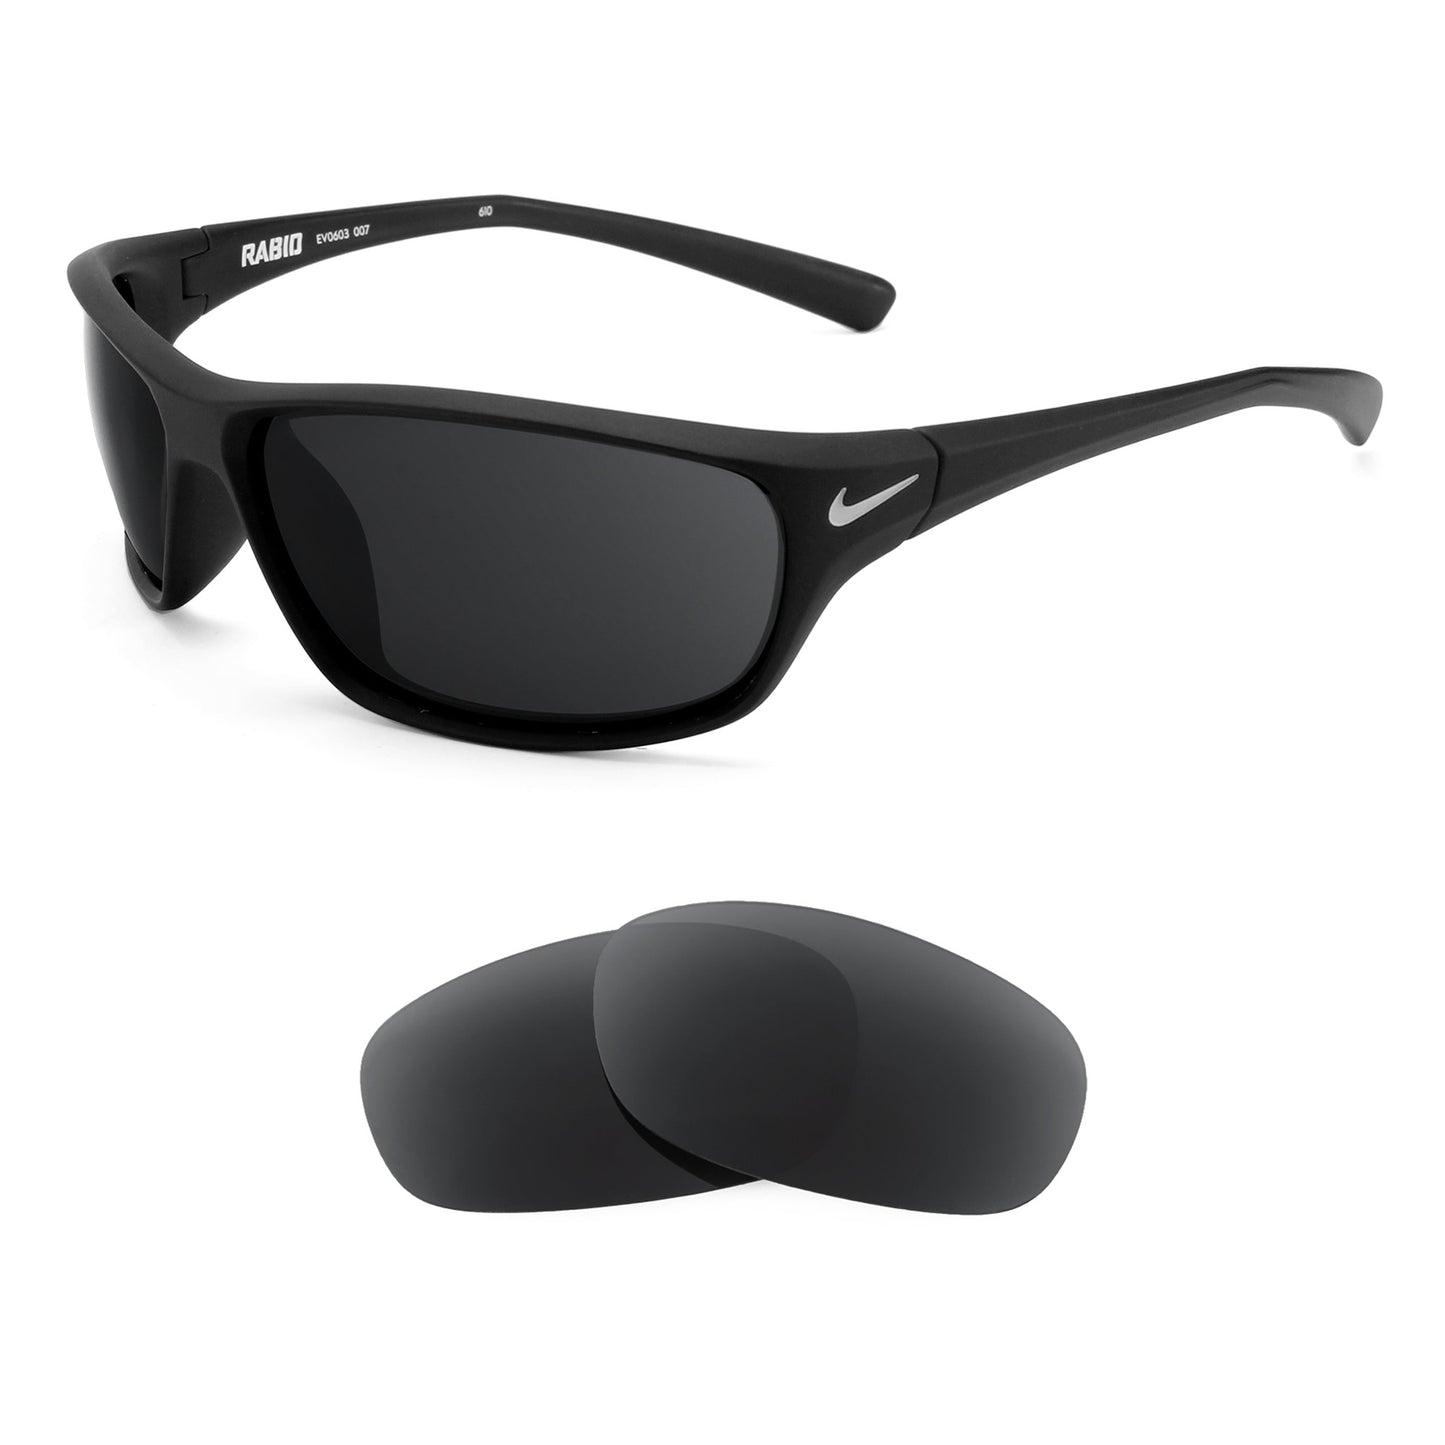 Nike Rabid sunglasses with replacement lenses